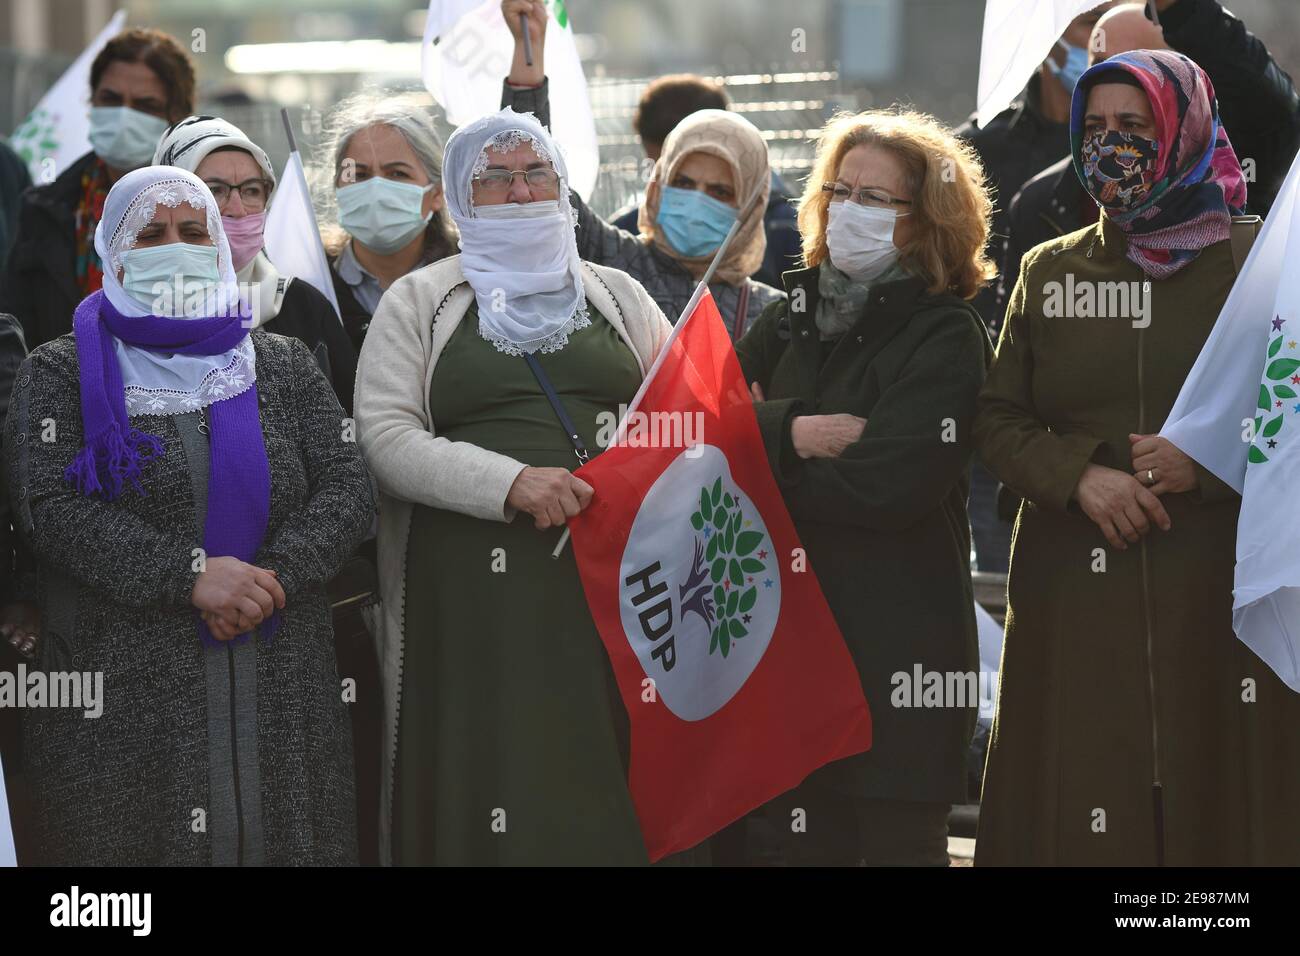 Supporters of Selahattin Demirtas, a jailed former co-leader of the pro-Kurdish Peoples' Democratic Party (HDP), gather for a press statement outside the Istanbul Justice Palace, the Caglayan Courthouse, in Istanbul, Turkey February 3, 2021. REUTERS/Murad Sezer Stock Photo